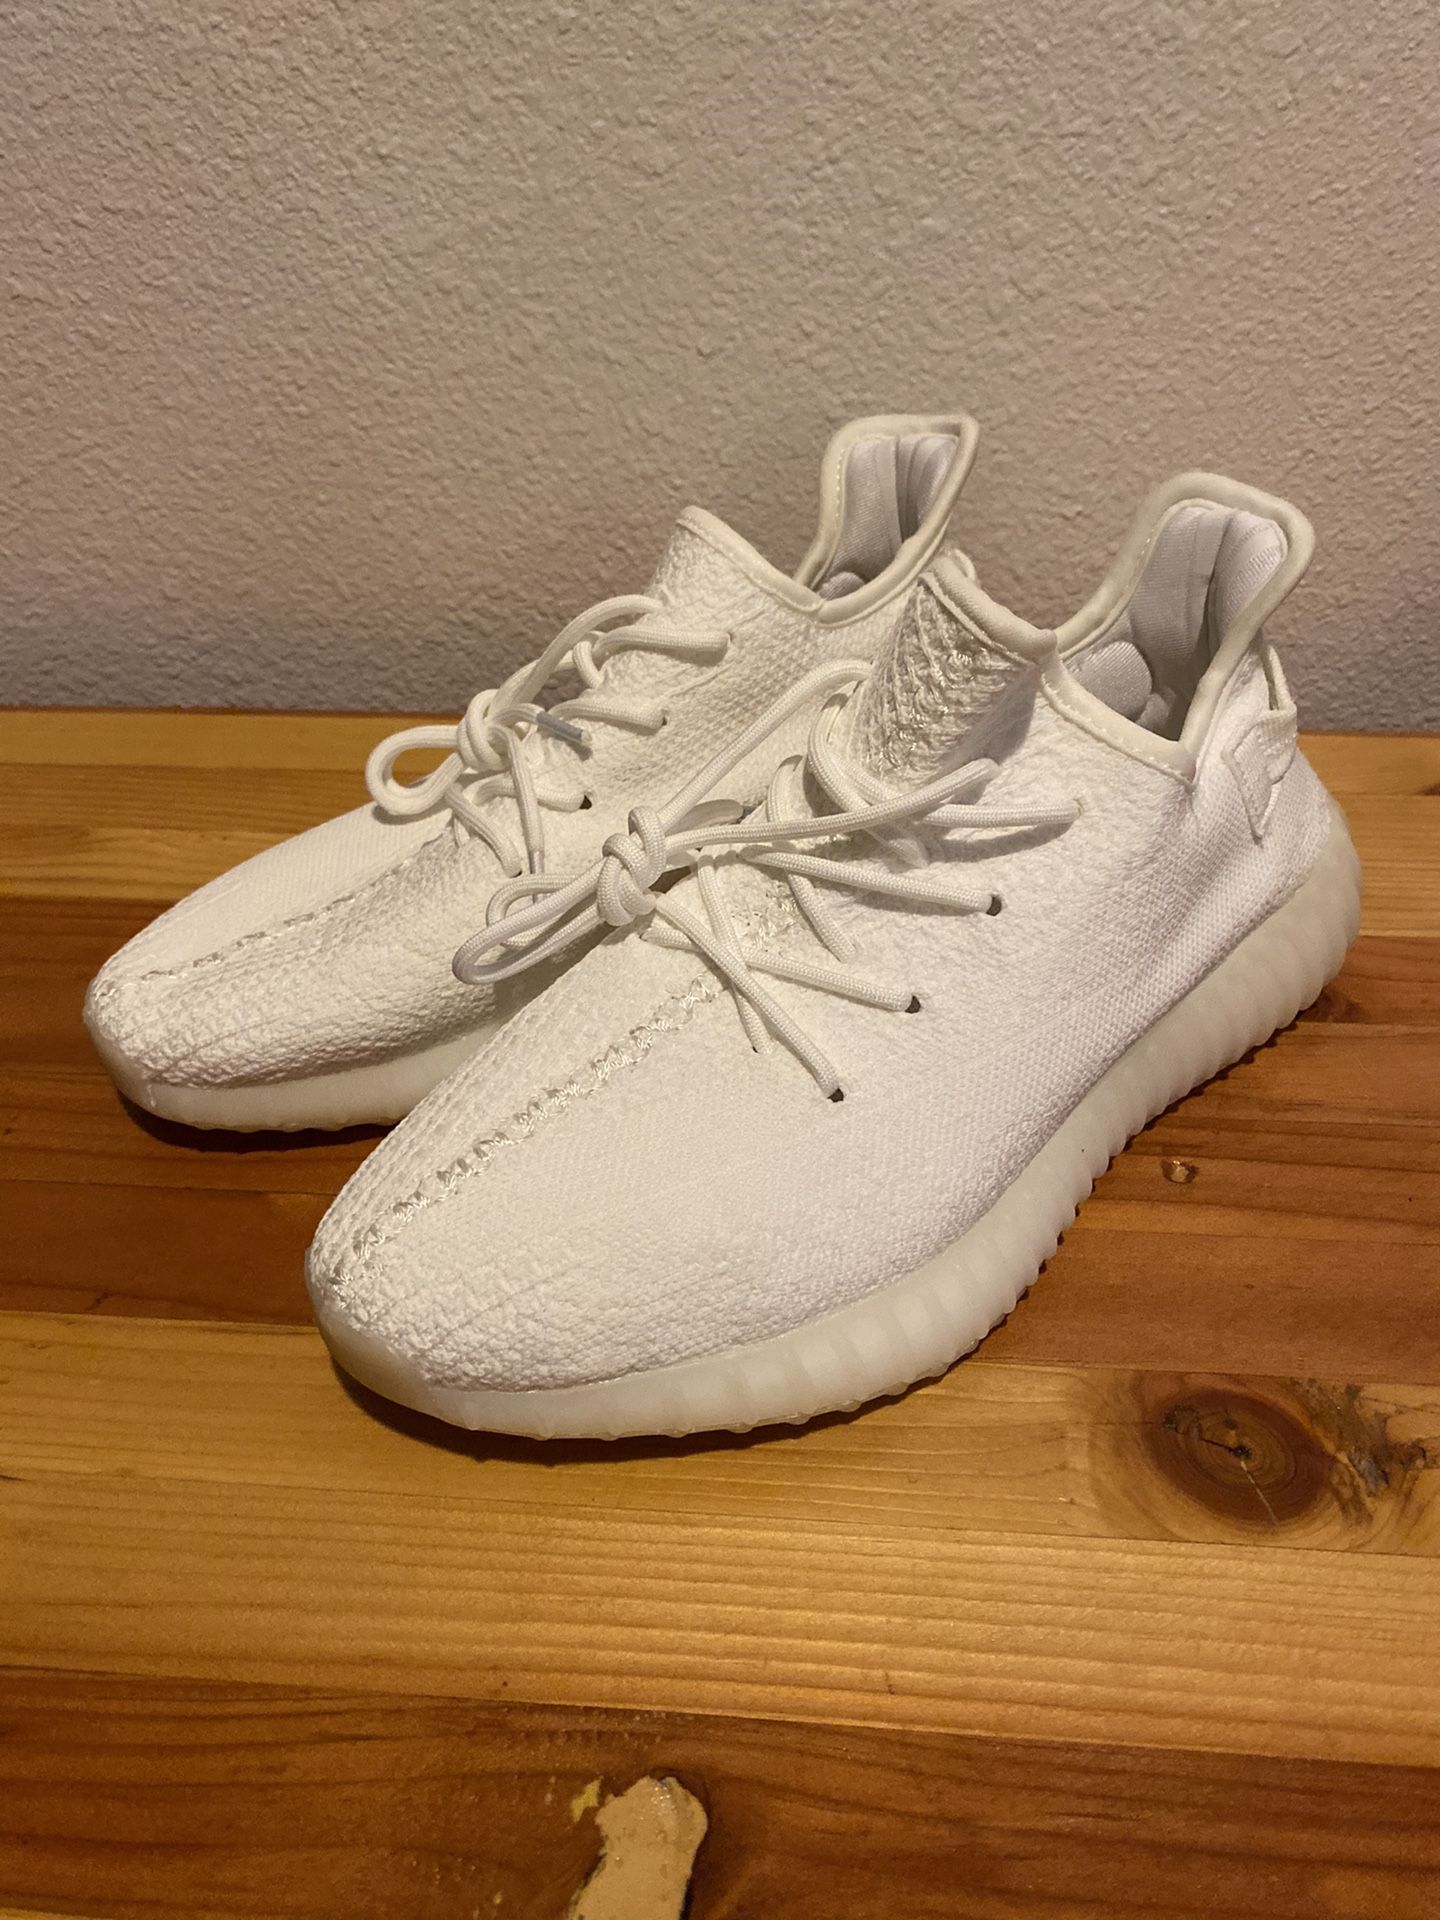 Yeezys 350 boost v2 cream / white shoes size 8 1/2 men’s